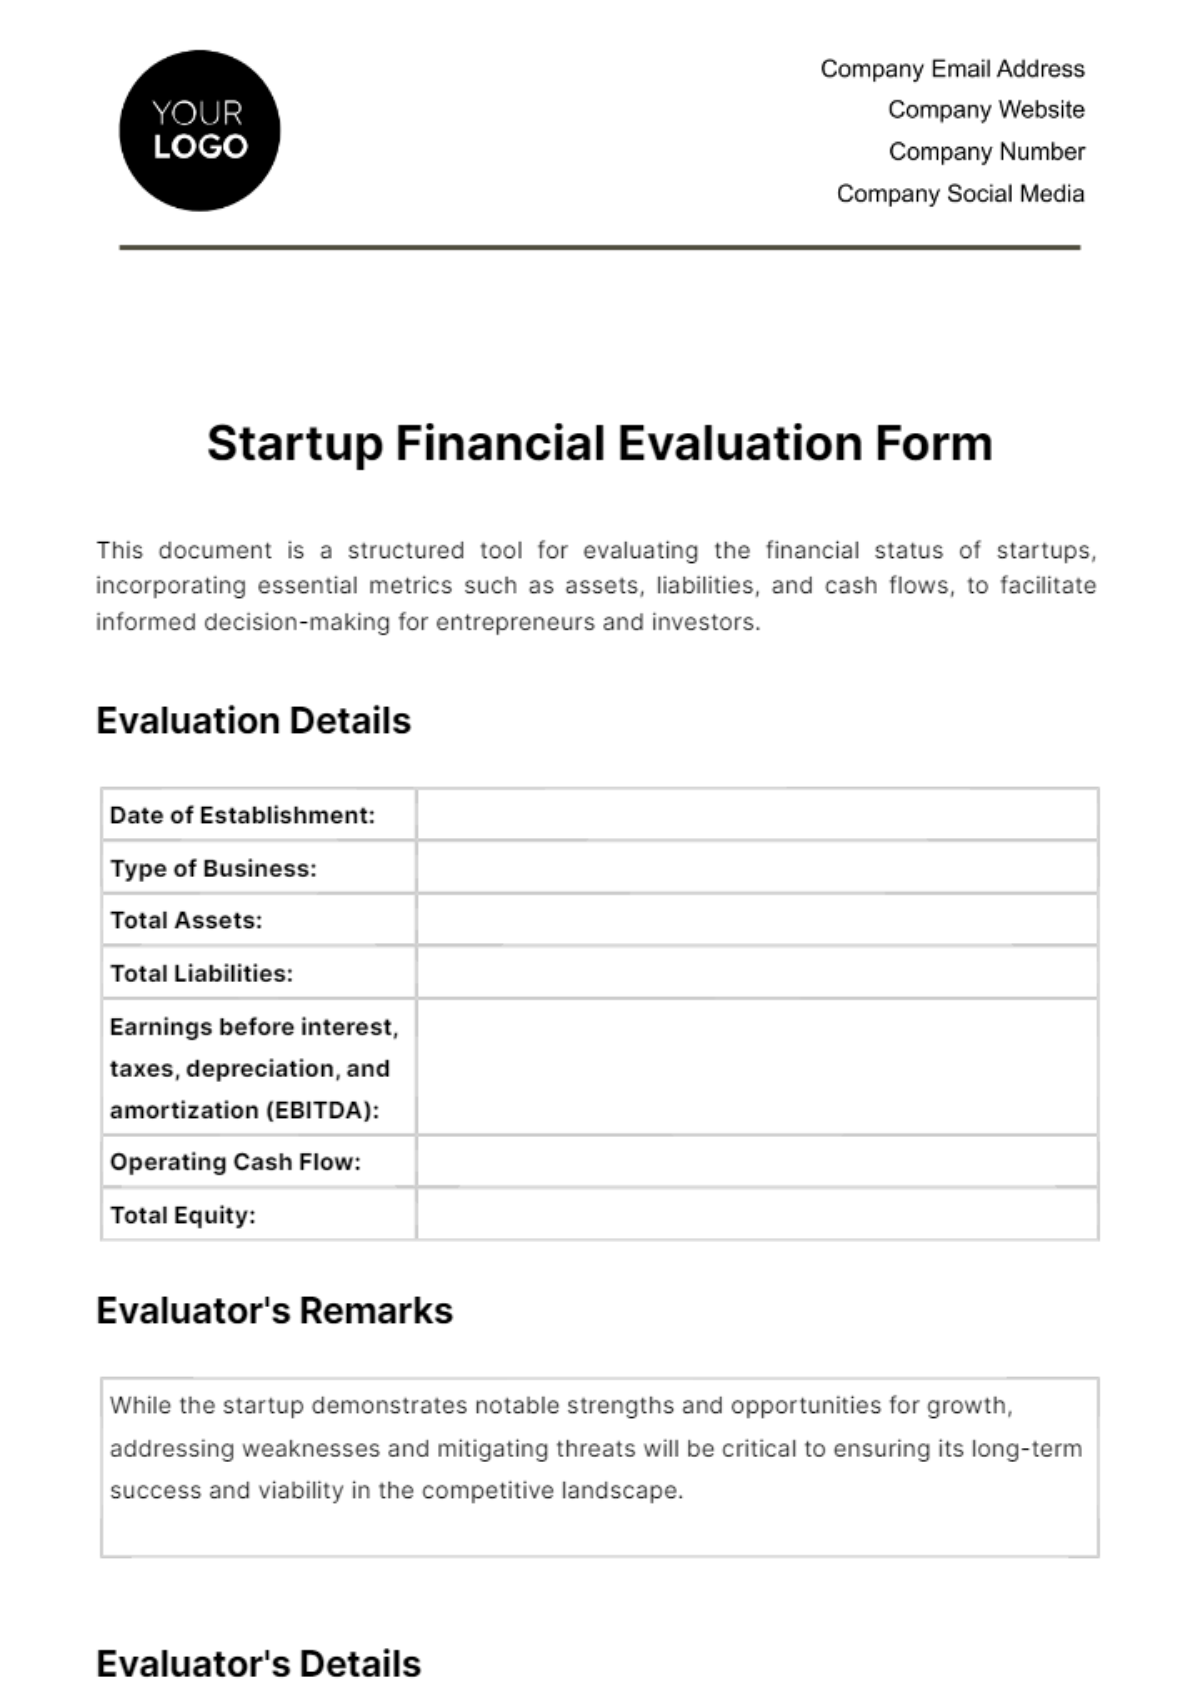 Startup Financial Evaluation Form Template